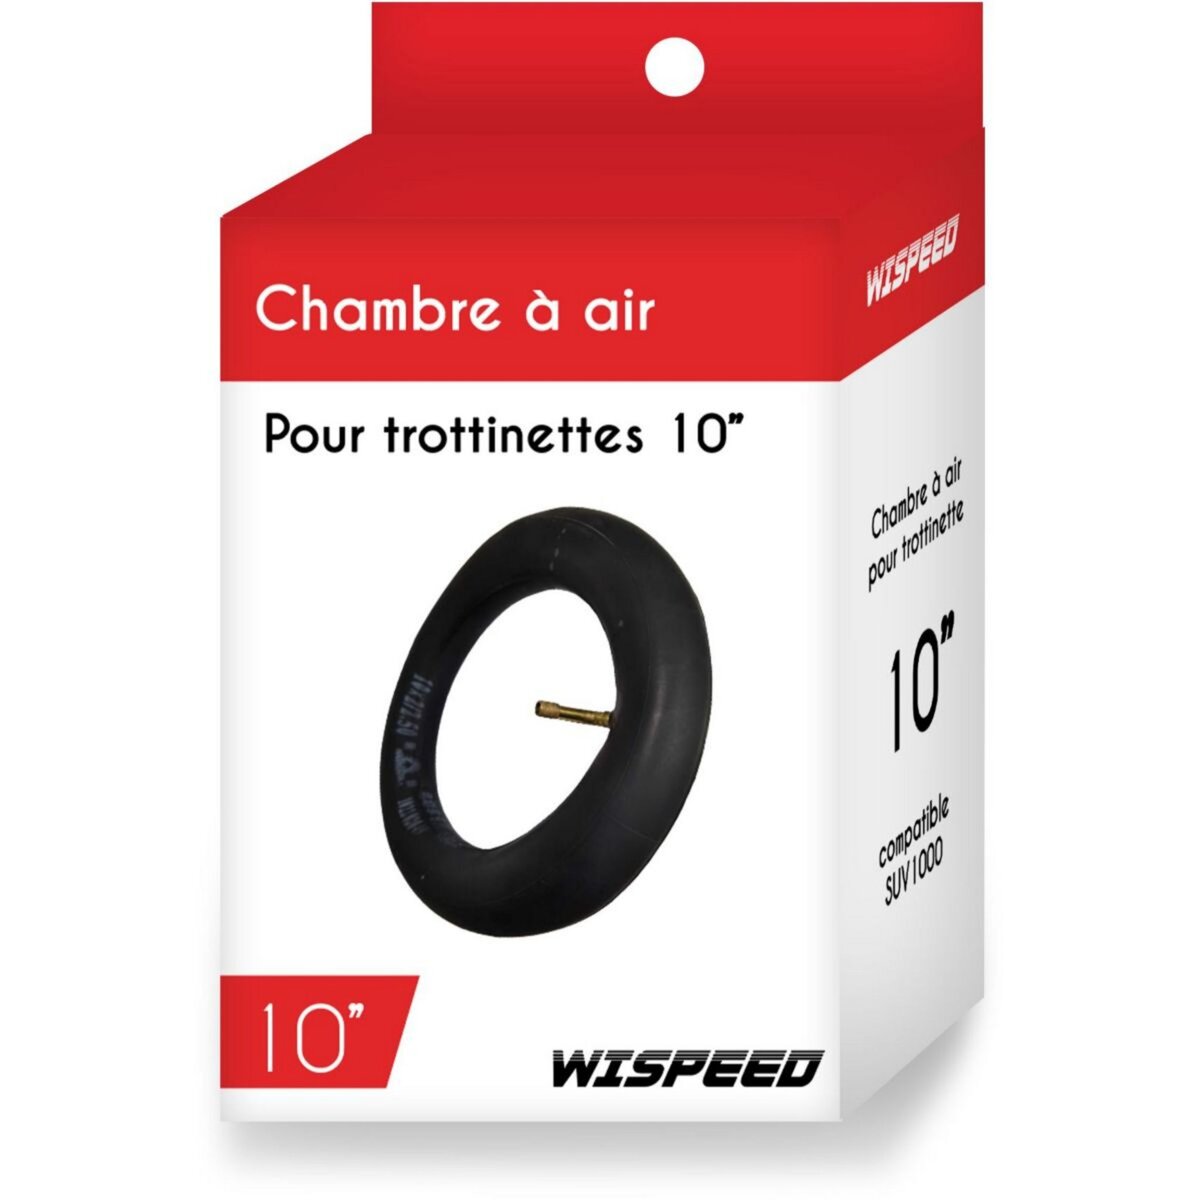 WISPEED Chambre à air 10 pouces - trottinette Wispeed SUV1000